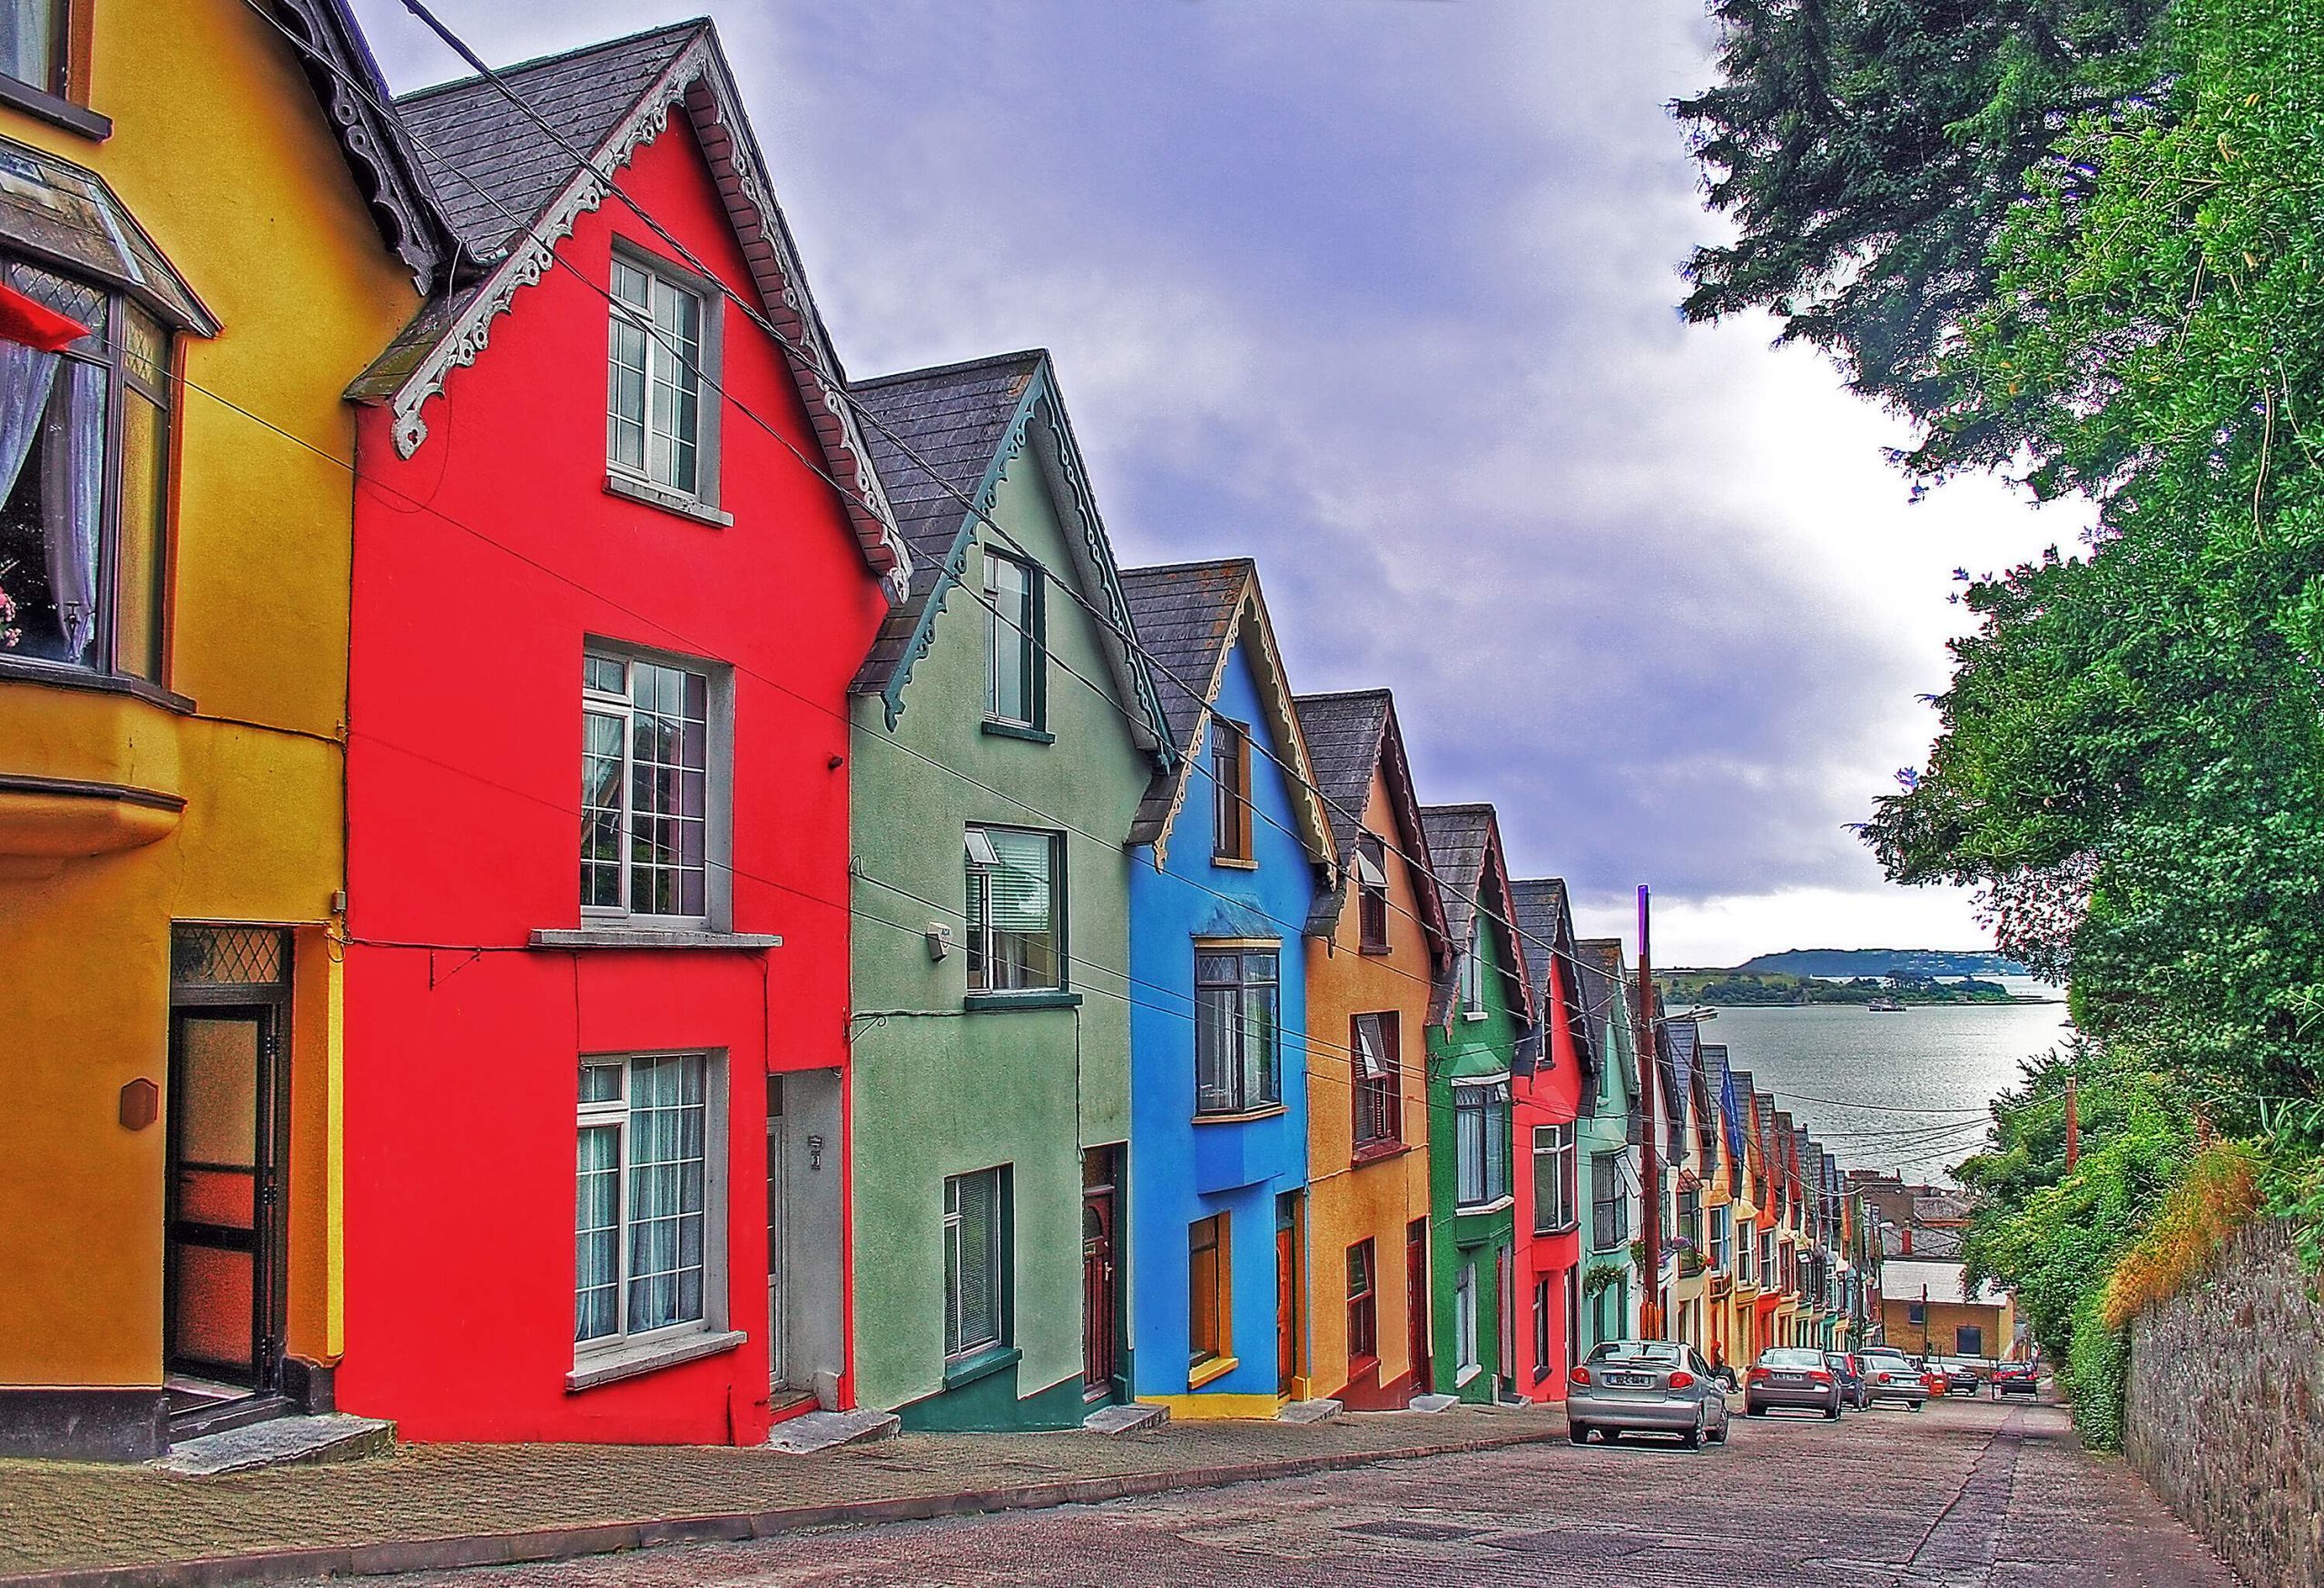 A row of colourful terraced houses along a downhill street with parked cars.